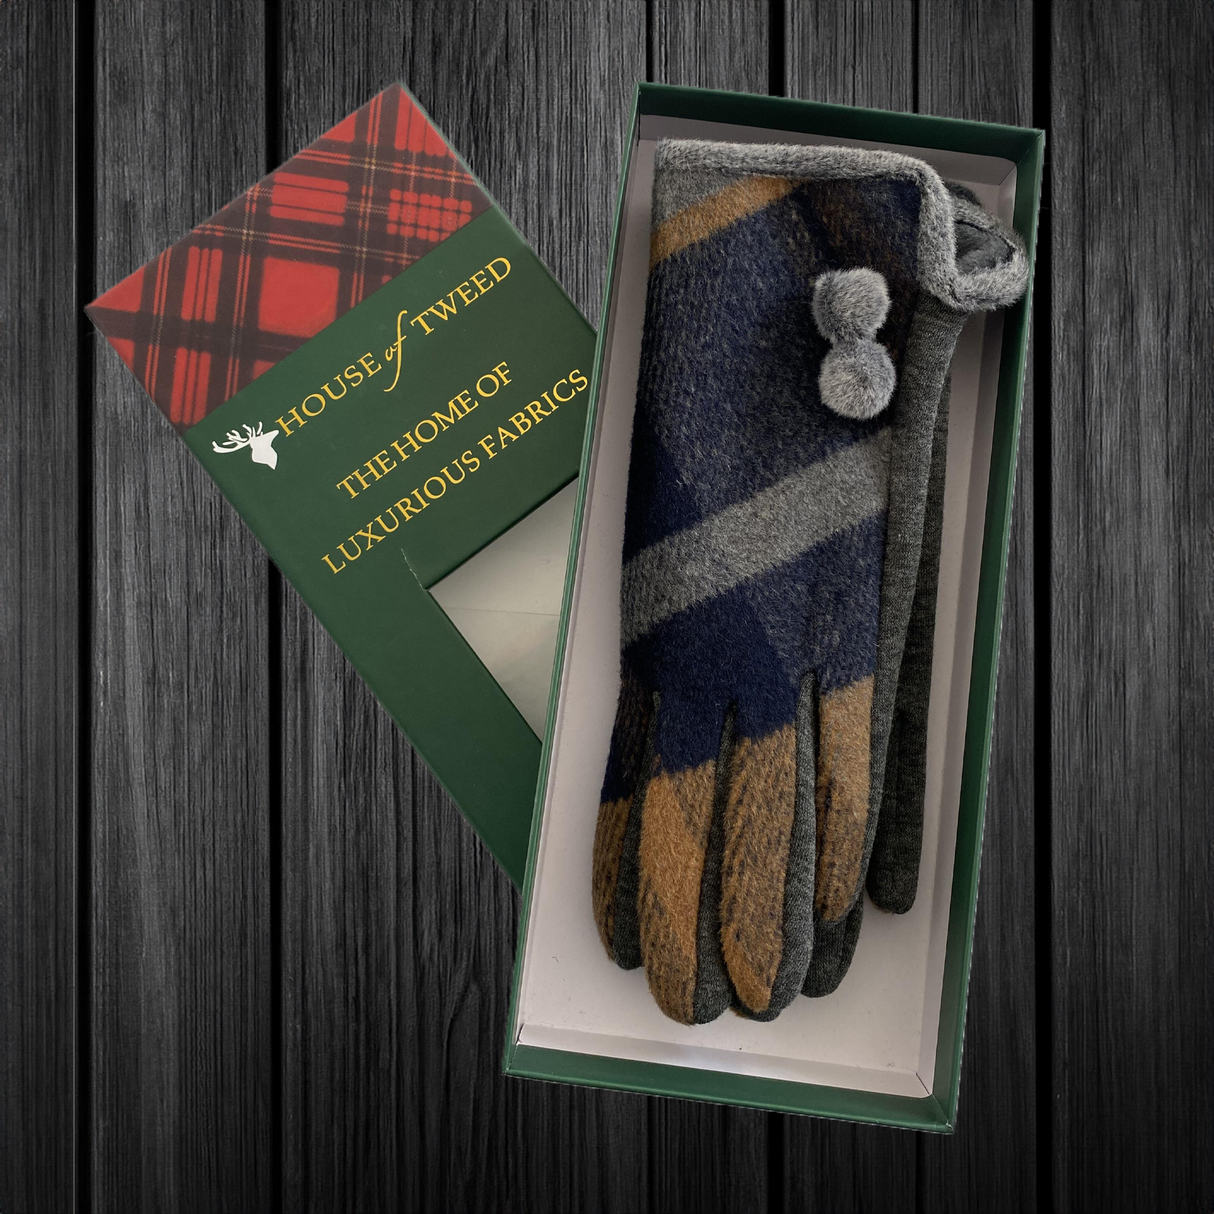 House Of Tweed Ladies Tartan Check Soft Gloves One Size - Just $20! Shop now at Warwickshire Clothing. Free Dellivery.